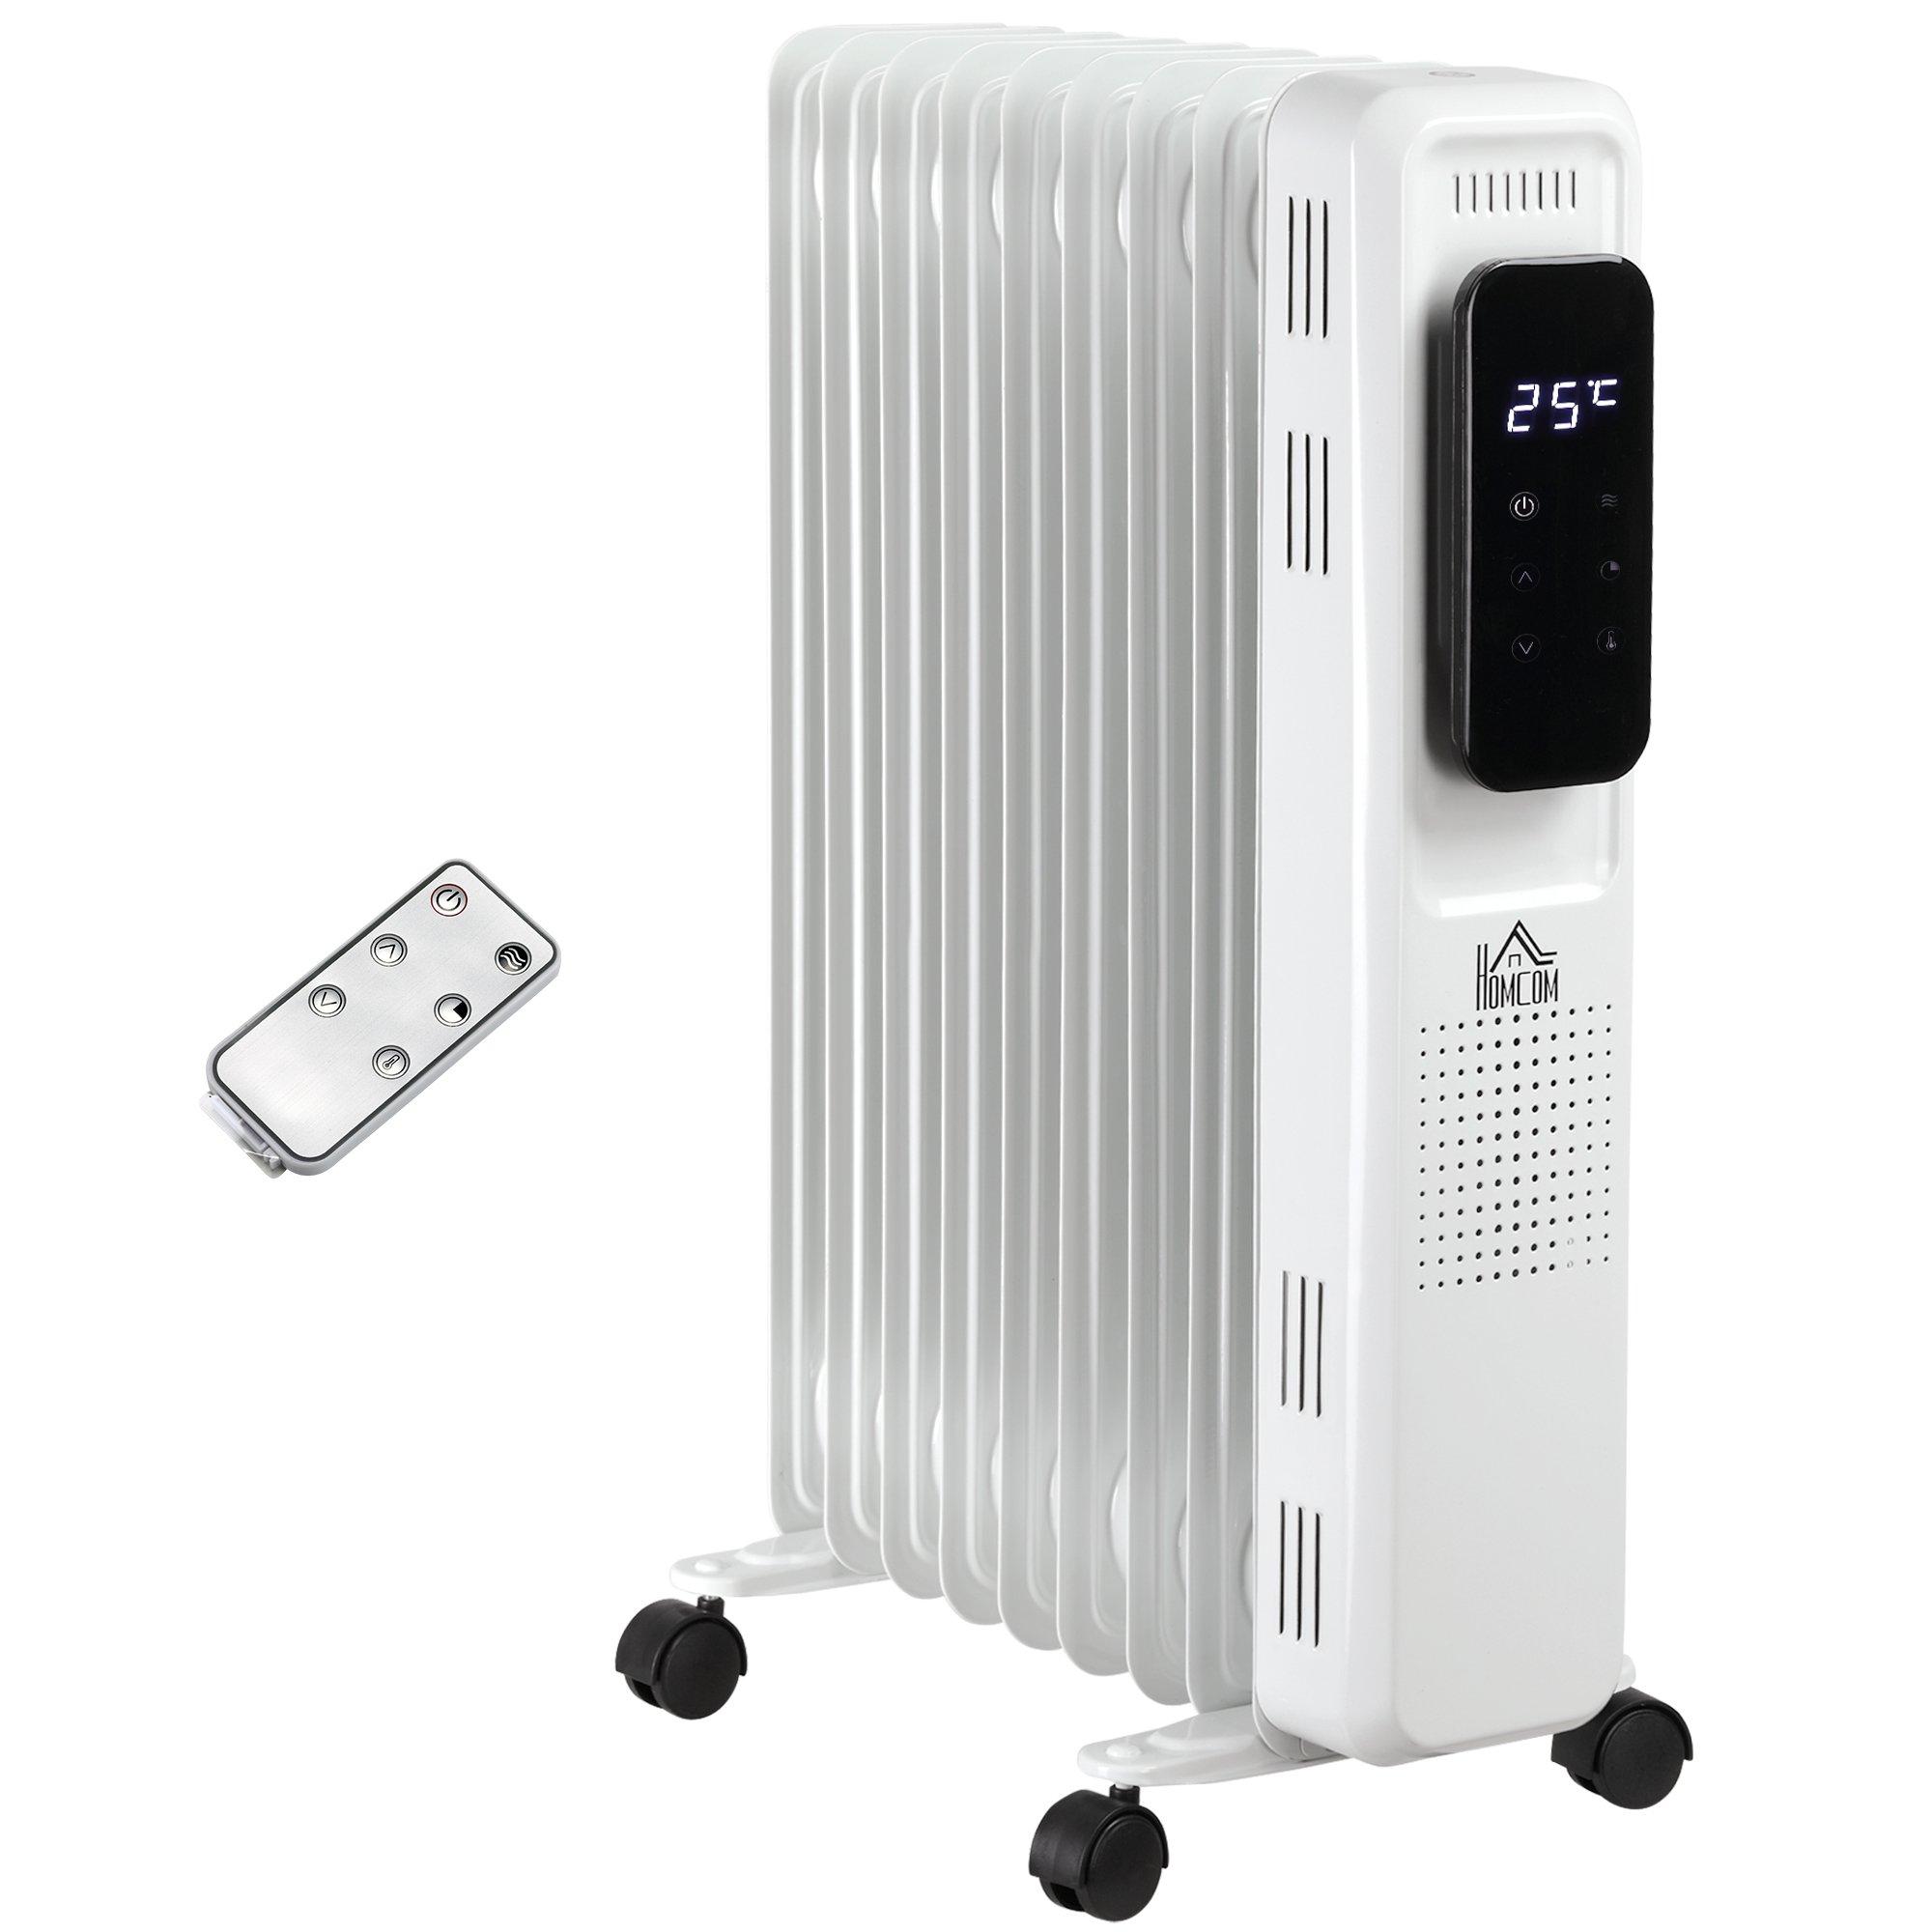 Oil Filled Radiator 9 Fin Portable Heater with Timer Remote Control